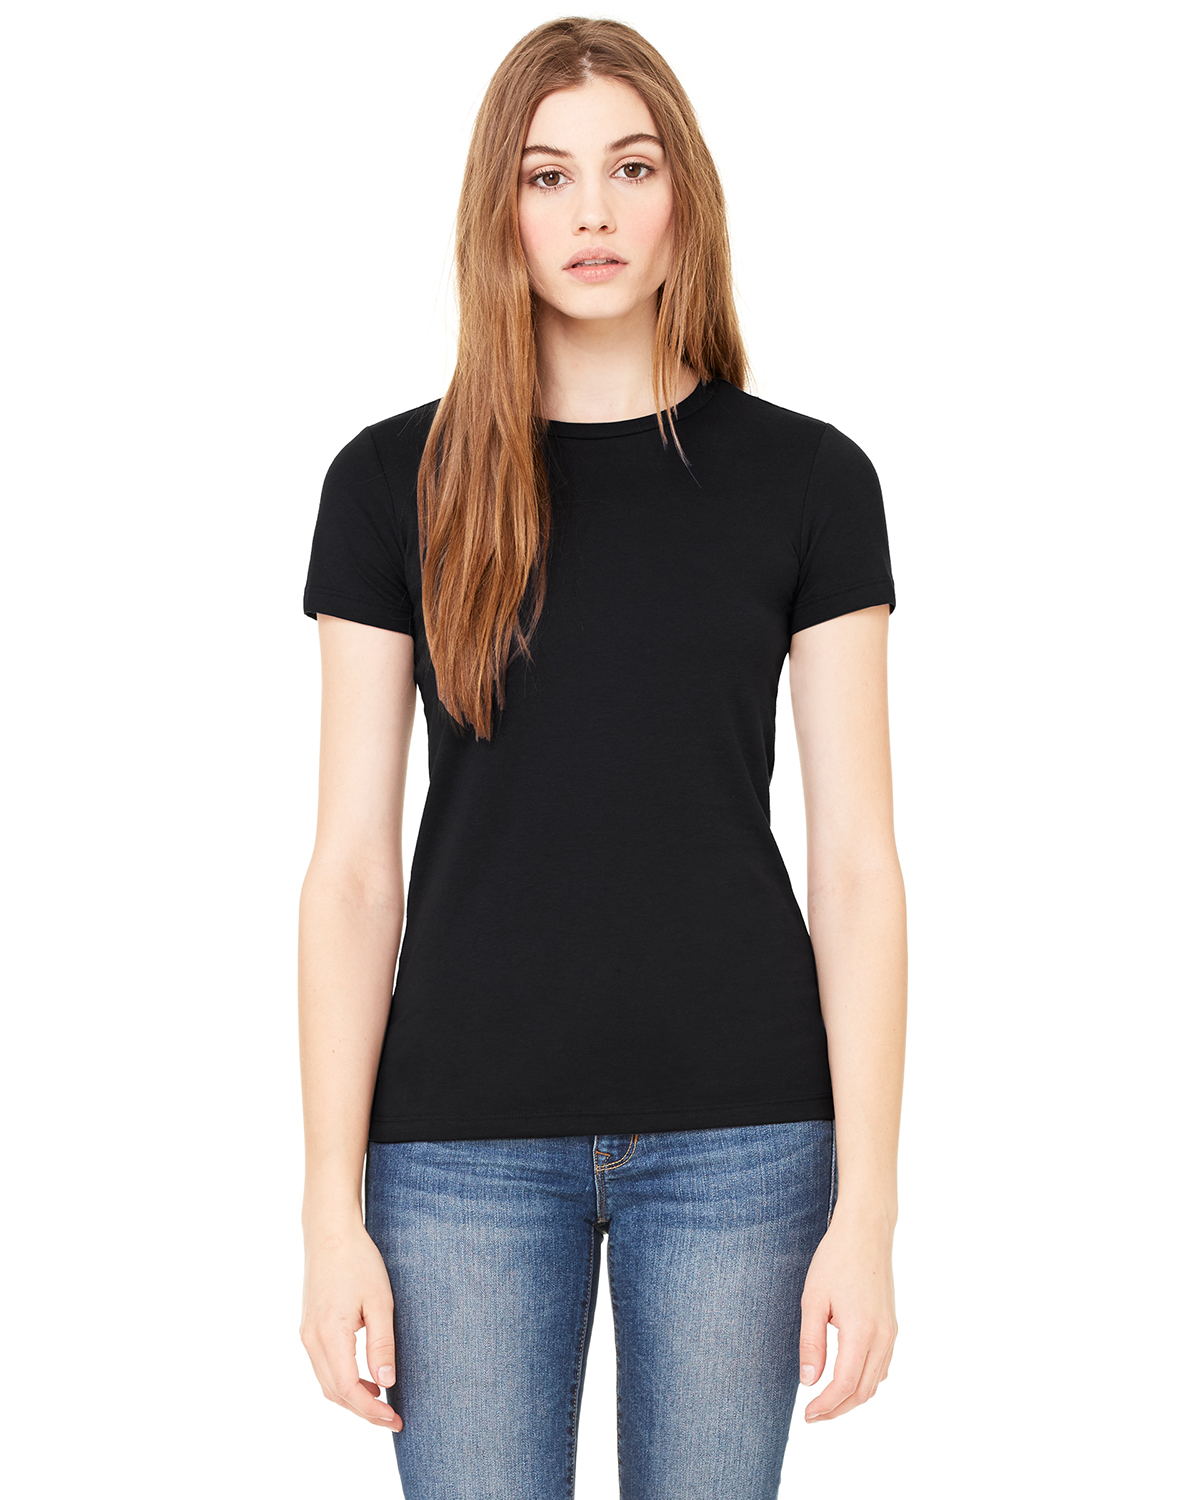 Canvas 6650 - Ladies' Poly/Cotton Short-Sleeve Tee $5.50